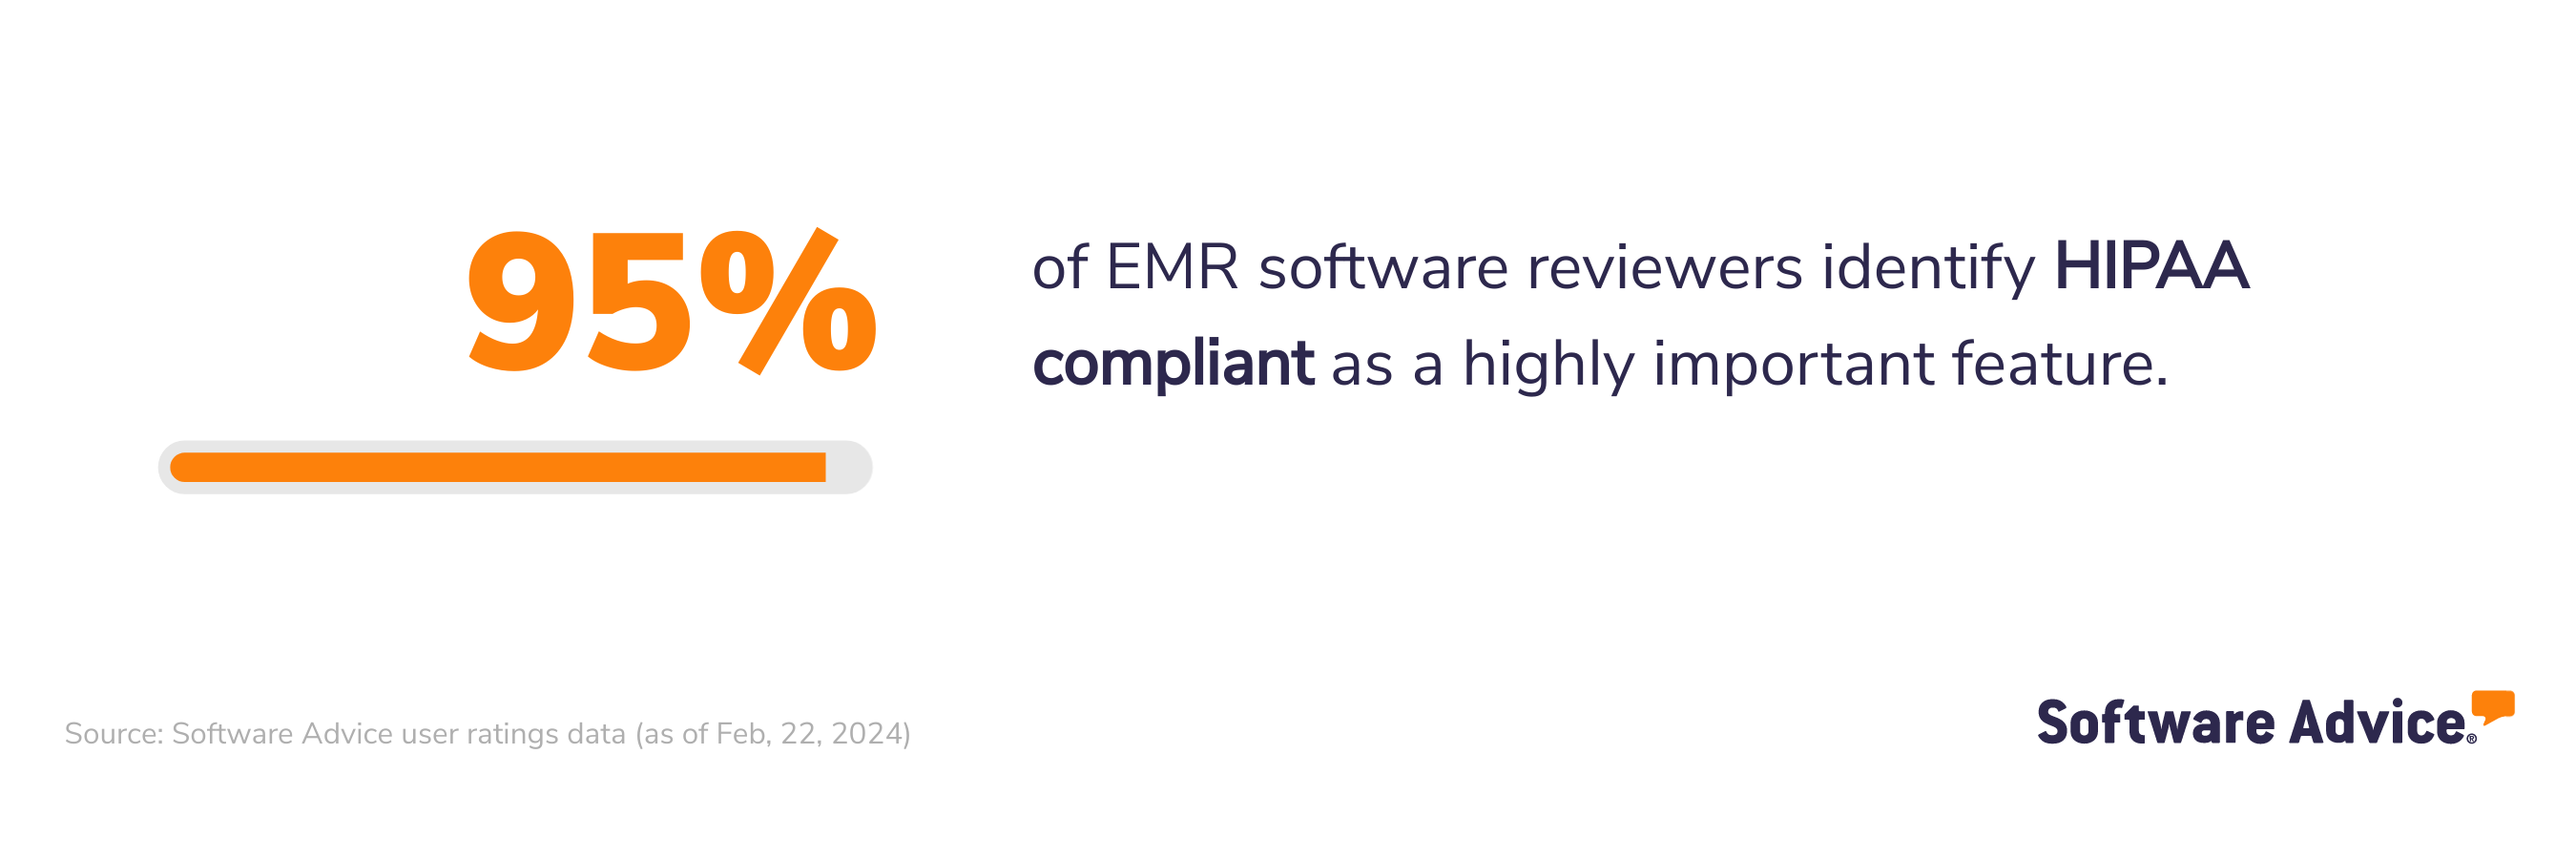 95% of EMR software reviewers identify HIPAA compliance as a highly important feature.